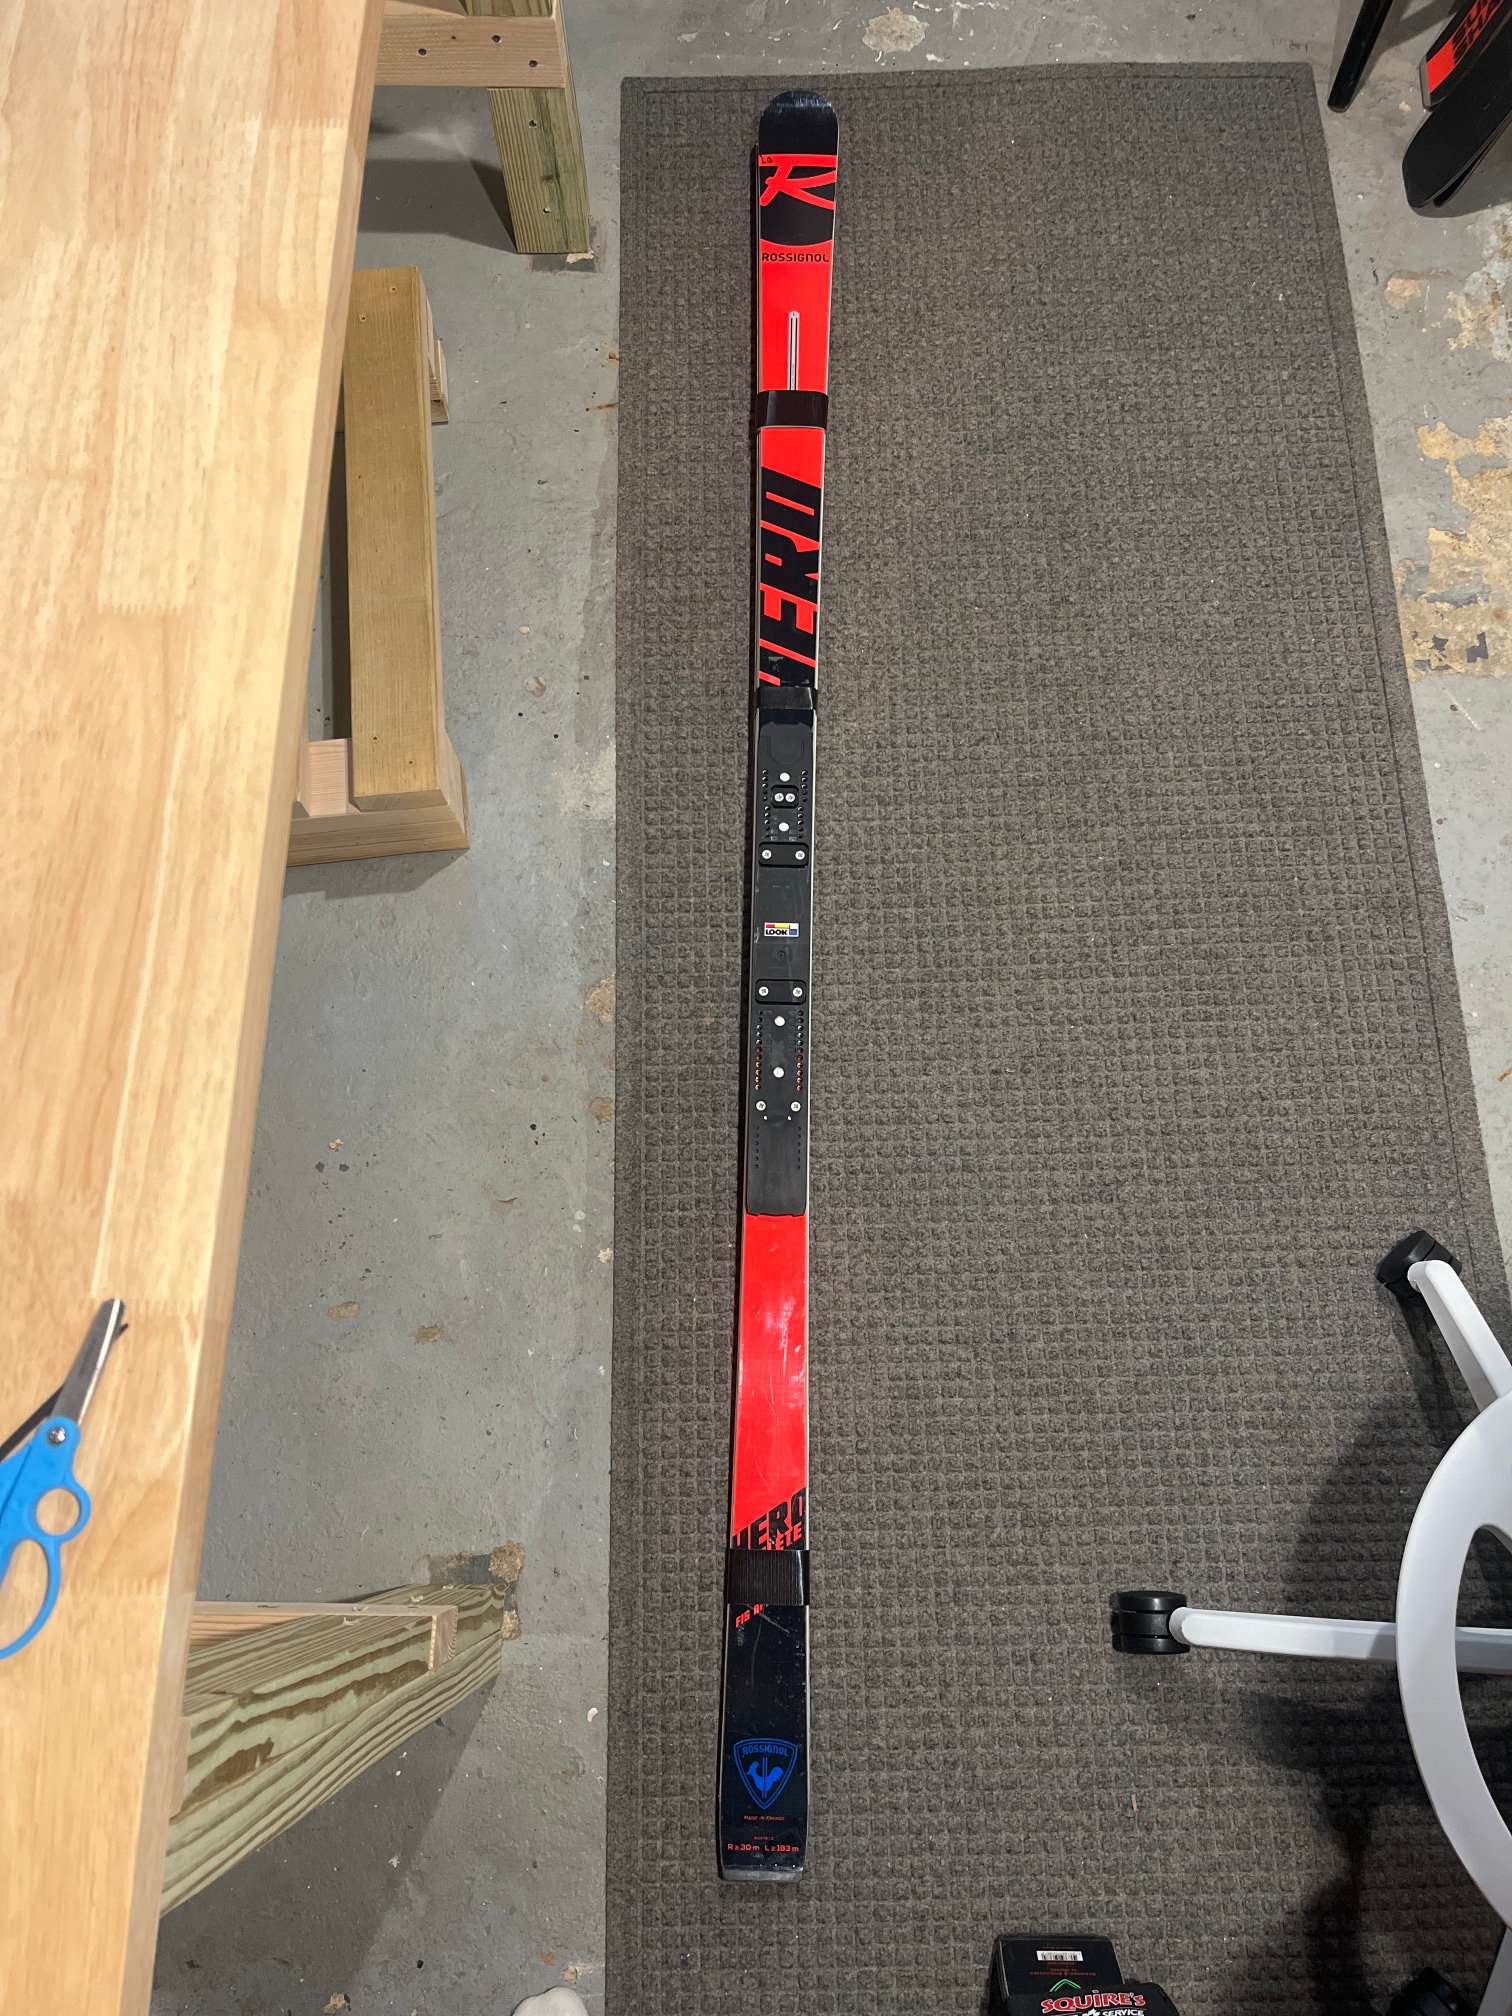 New 2020 Rossignol junior super-g 198 cm Racing Skis Without Bindings